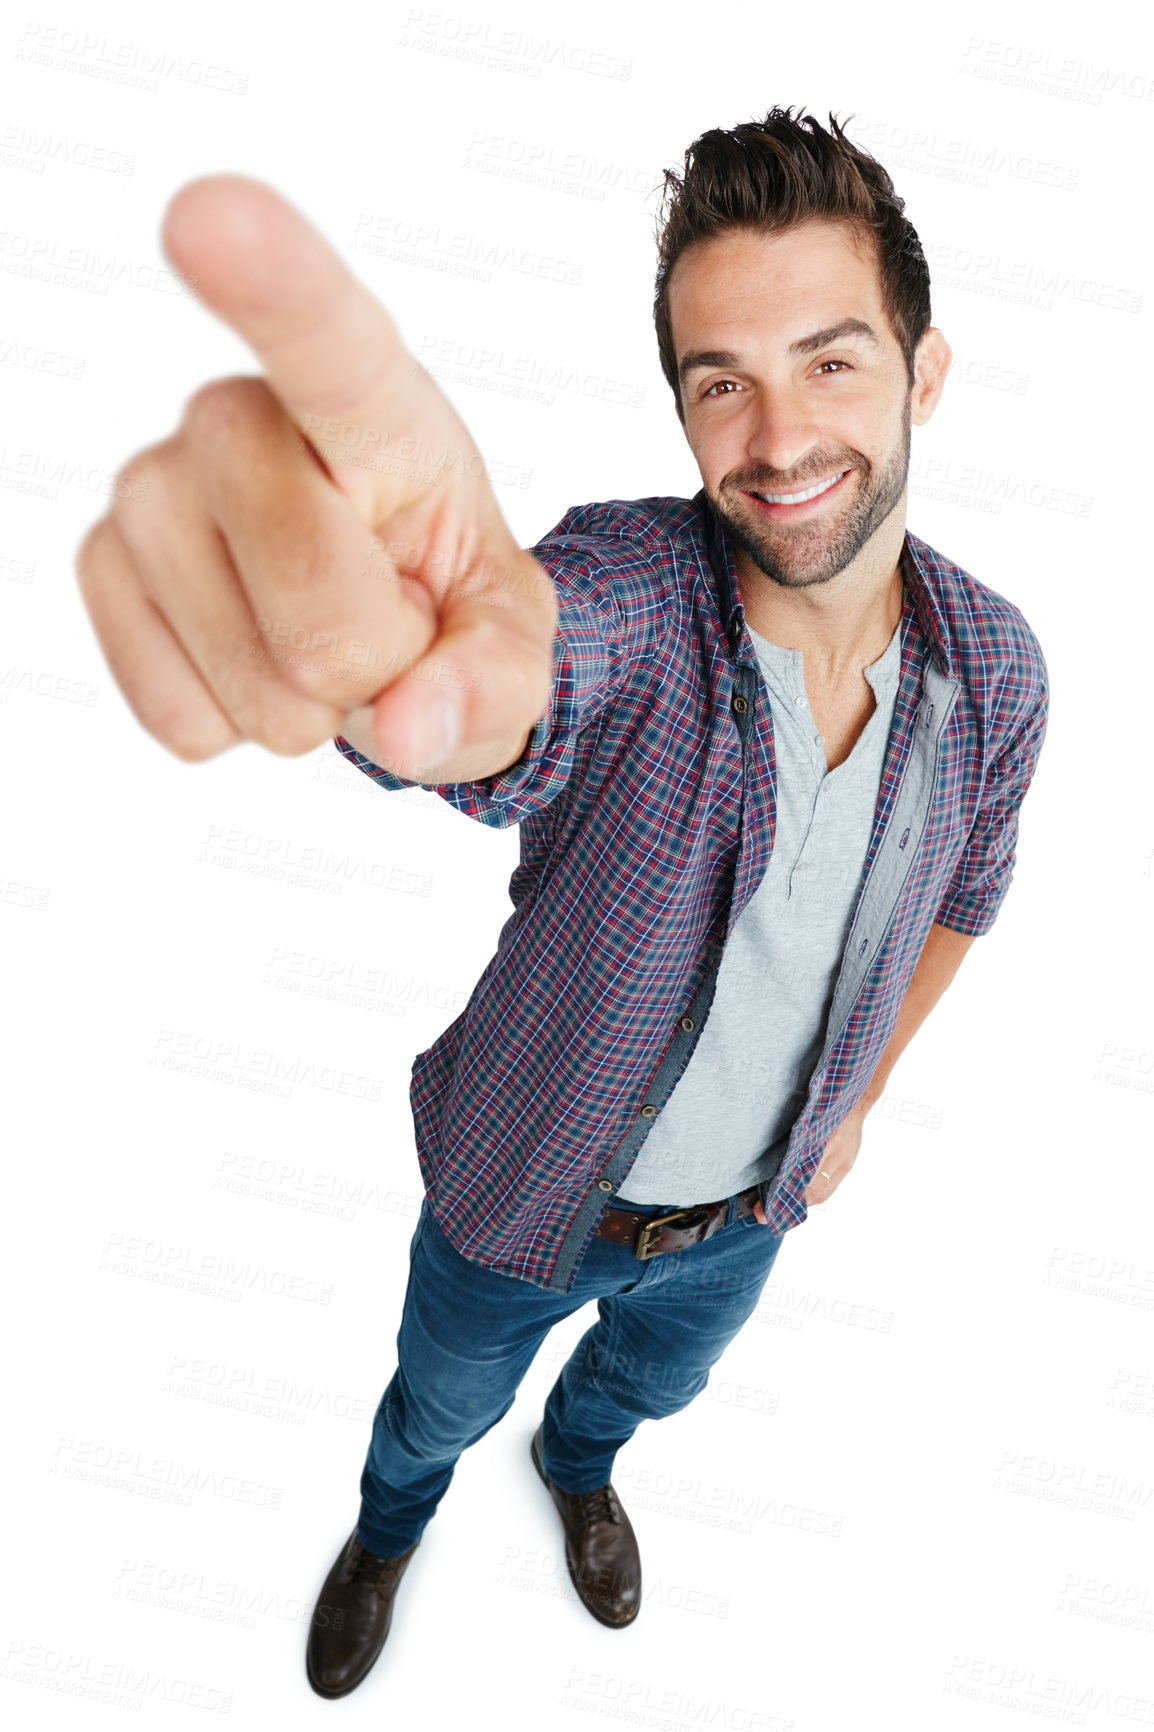 Buy stock photo Studio shot of a young man pointing against a white background